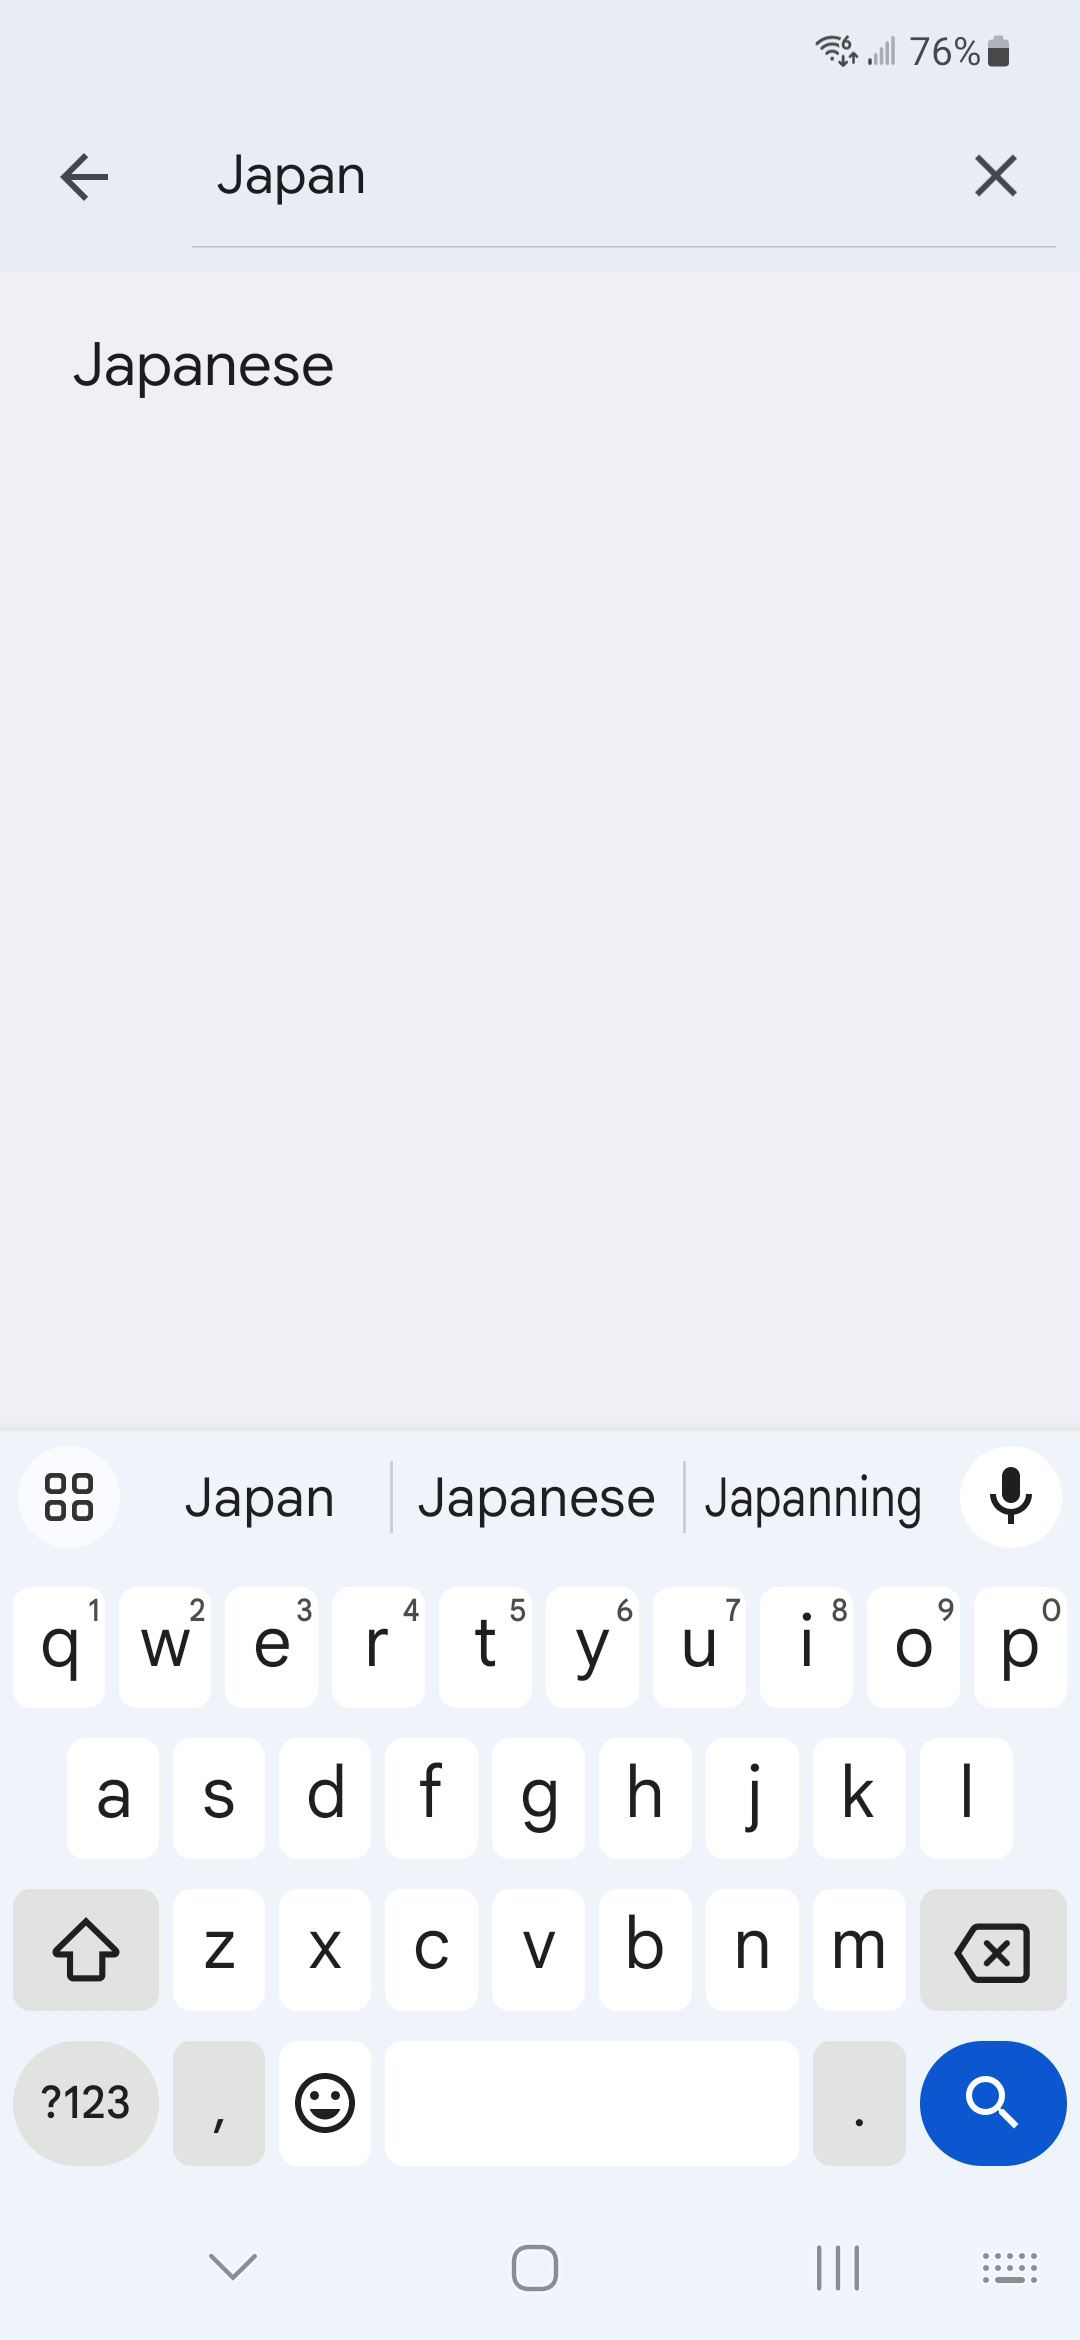 searching Japanese on gboard